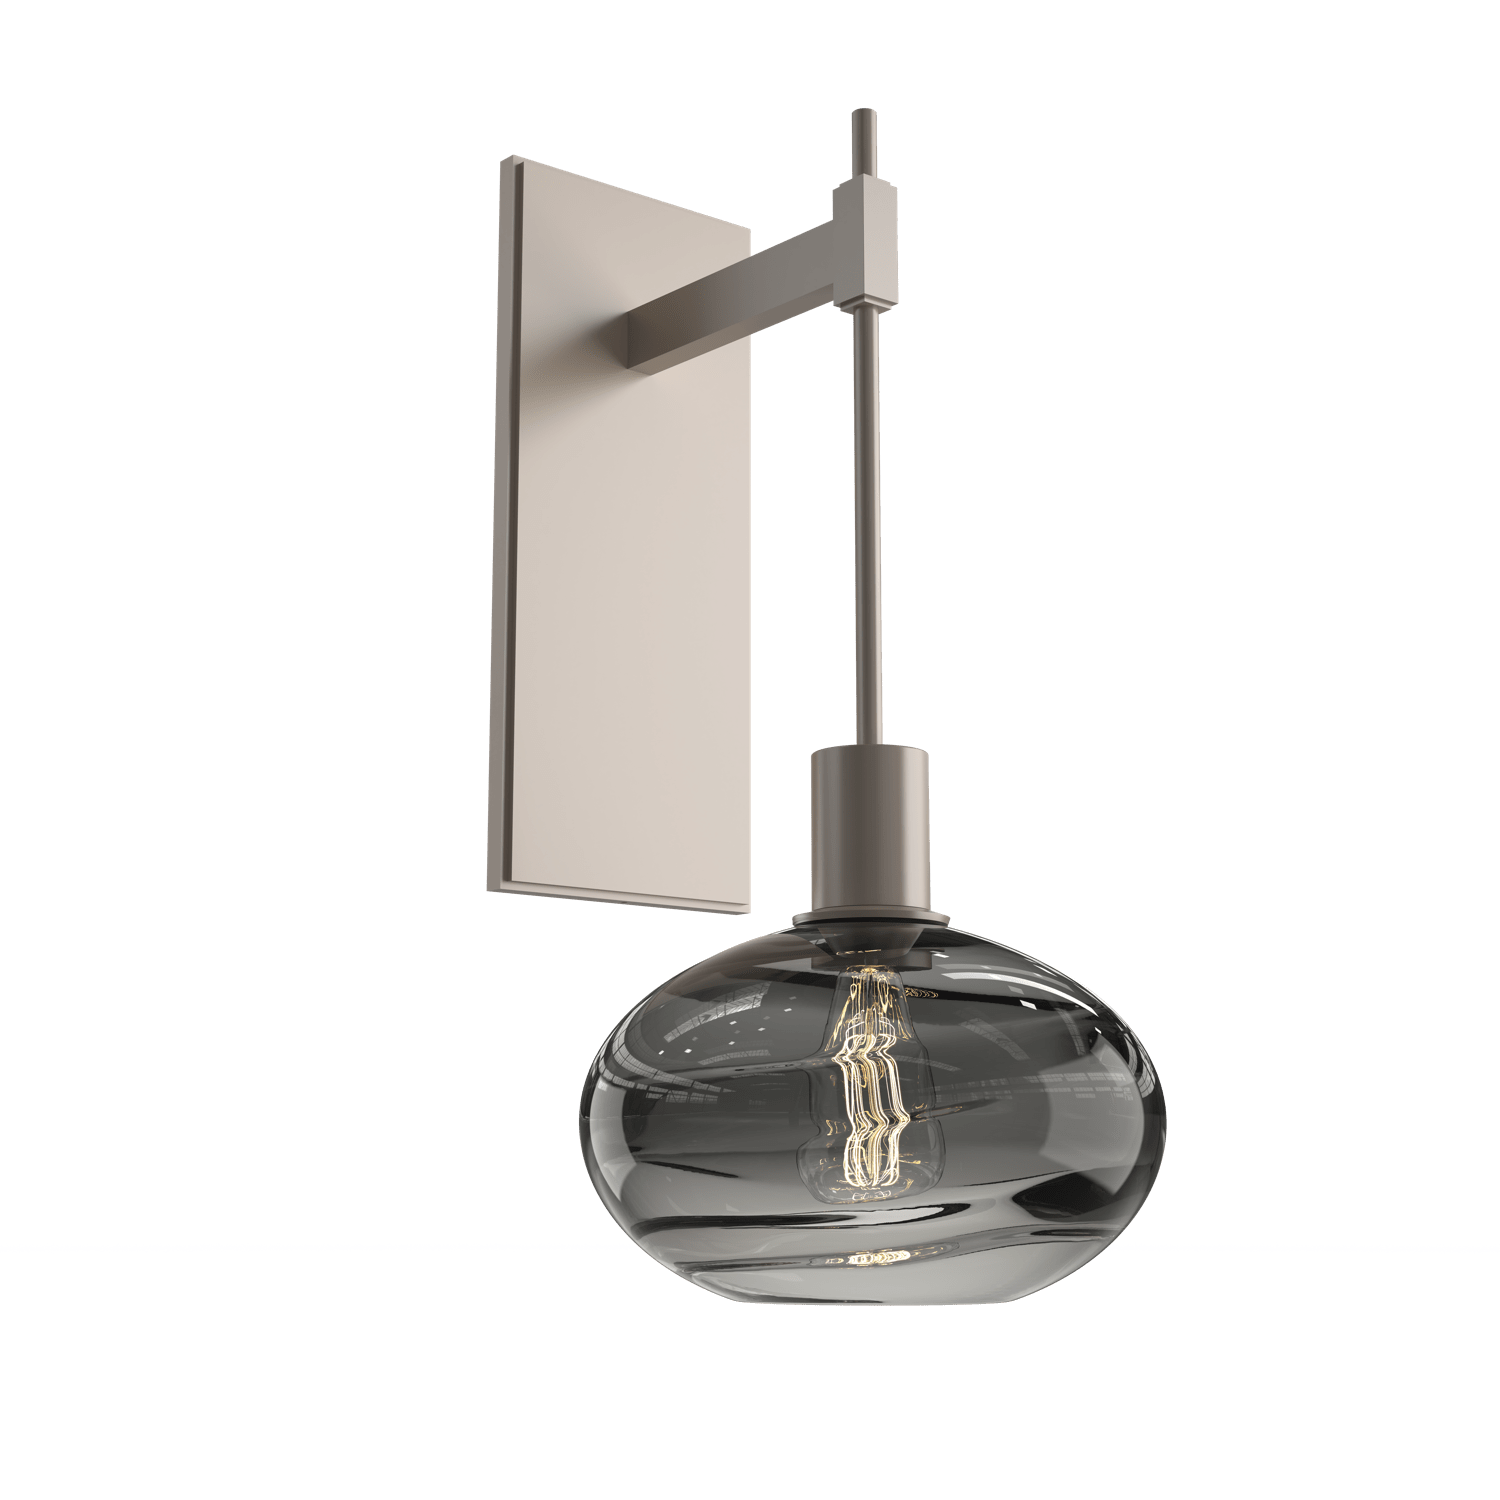 IDB0036-18-BS-OS-Hammerton-Studio-Optic-Blown-Glass-Coppa-tempo-wall-sconce-with-metallic-beige-silver-finish-and-optic-smoke-blown-glass-shades-and-incandescent-lamping